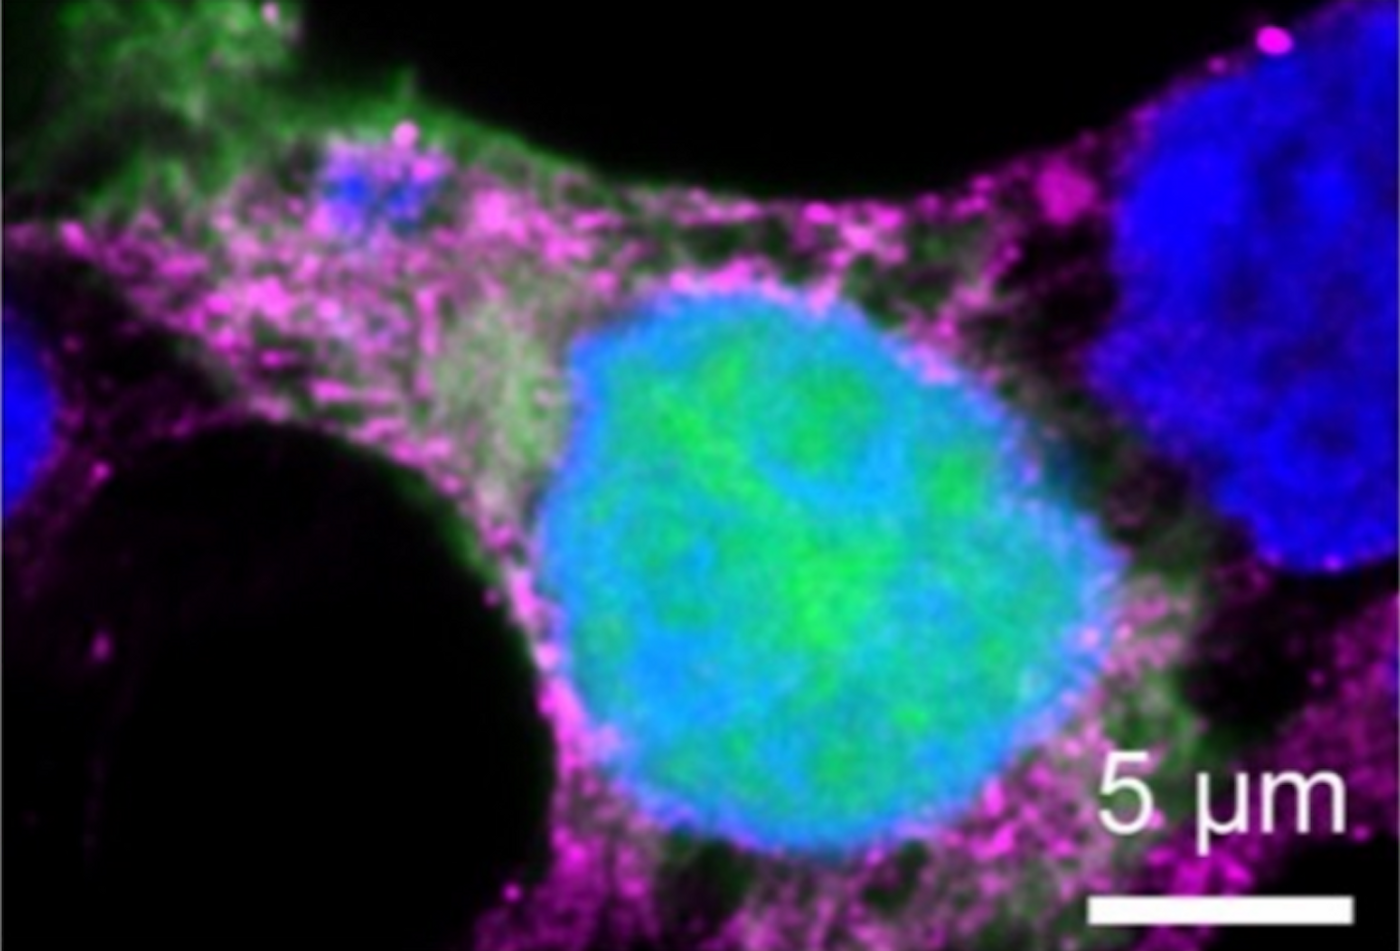 Cellular proteins that may interact with Lassa virus polymerase during viral replication are labeled. Engineered LASV L-TurboID (magenta), host cell proteins that interact with viral polymerase (orange), and viral polymerase (green) are seen. / Credit: Scripps Research